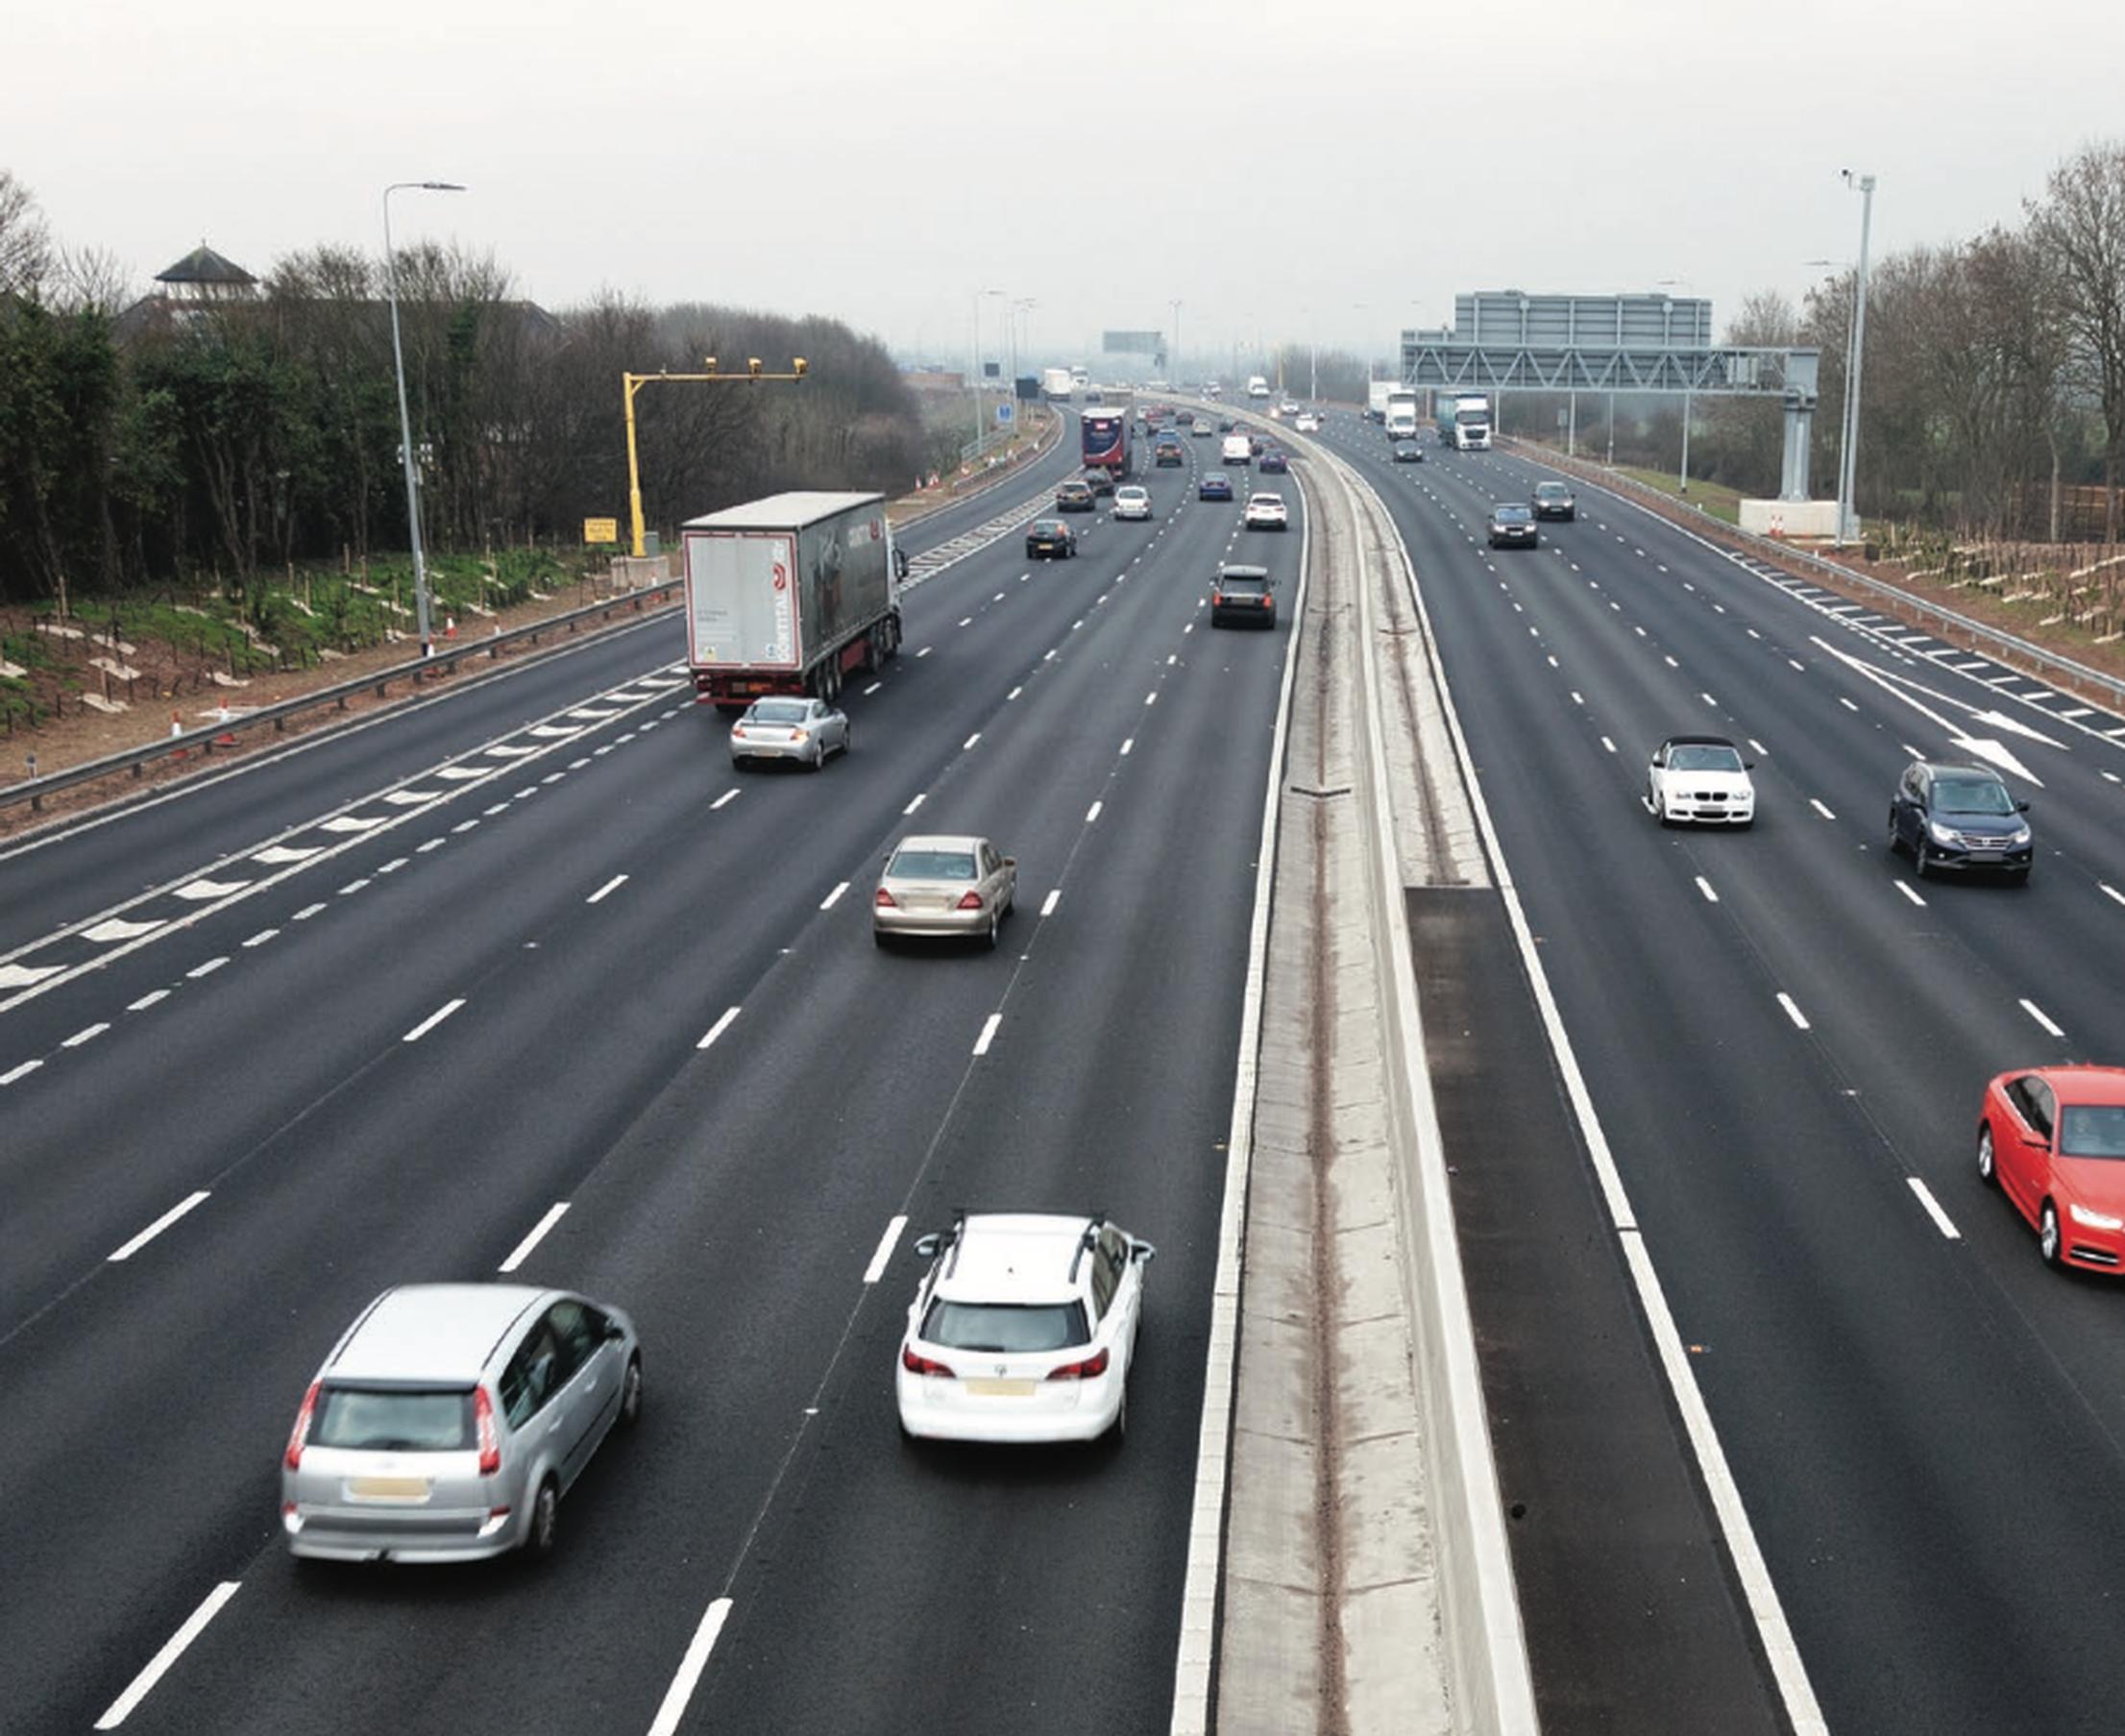 Highways England will install radar technology on all existing stretches of ALR motorway six months earlier than planned